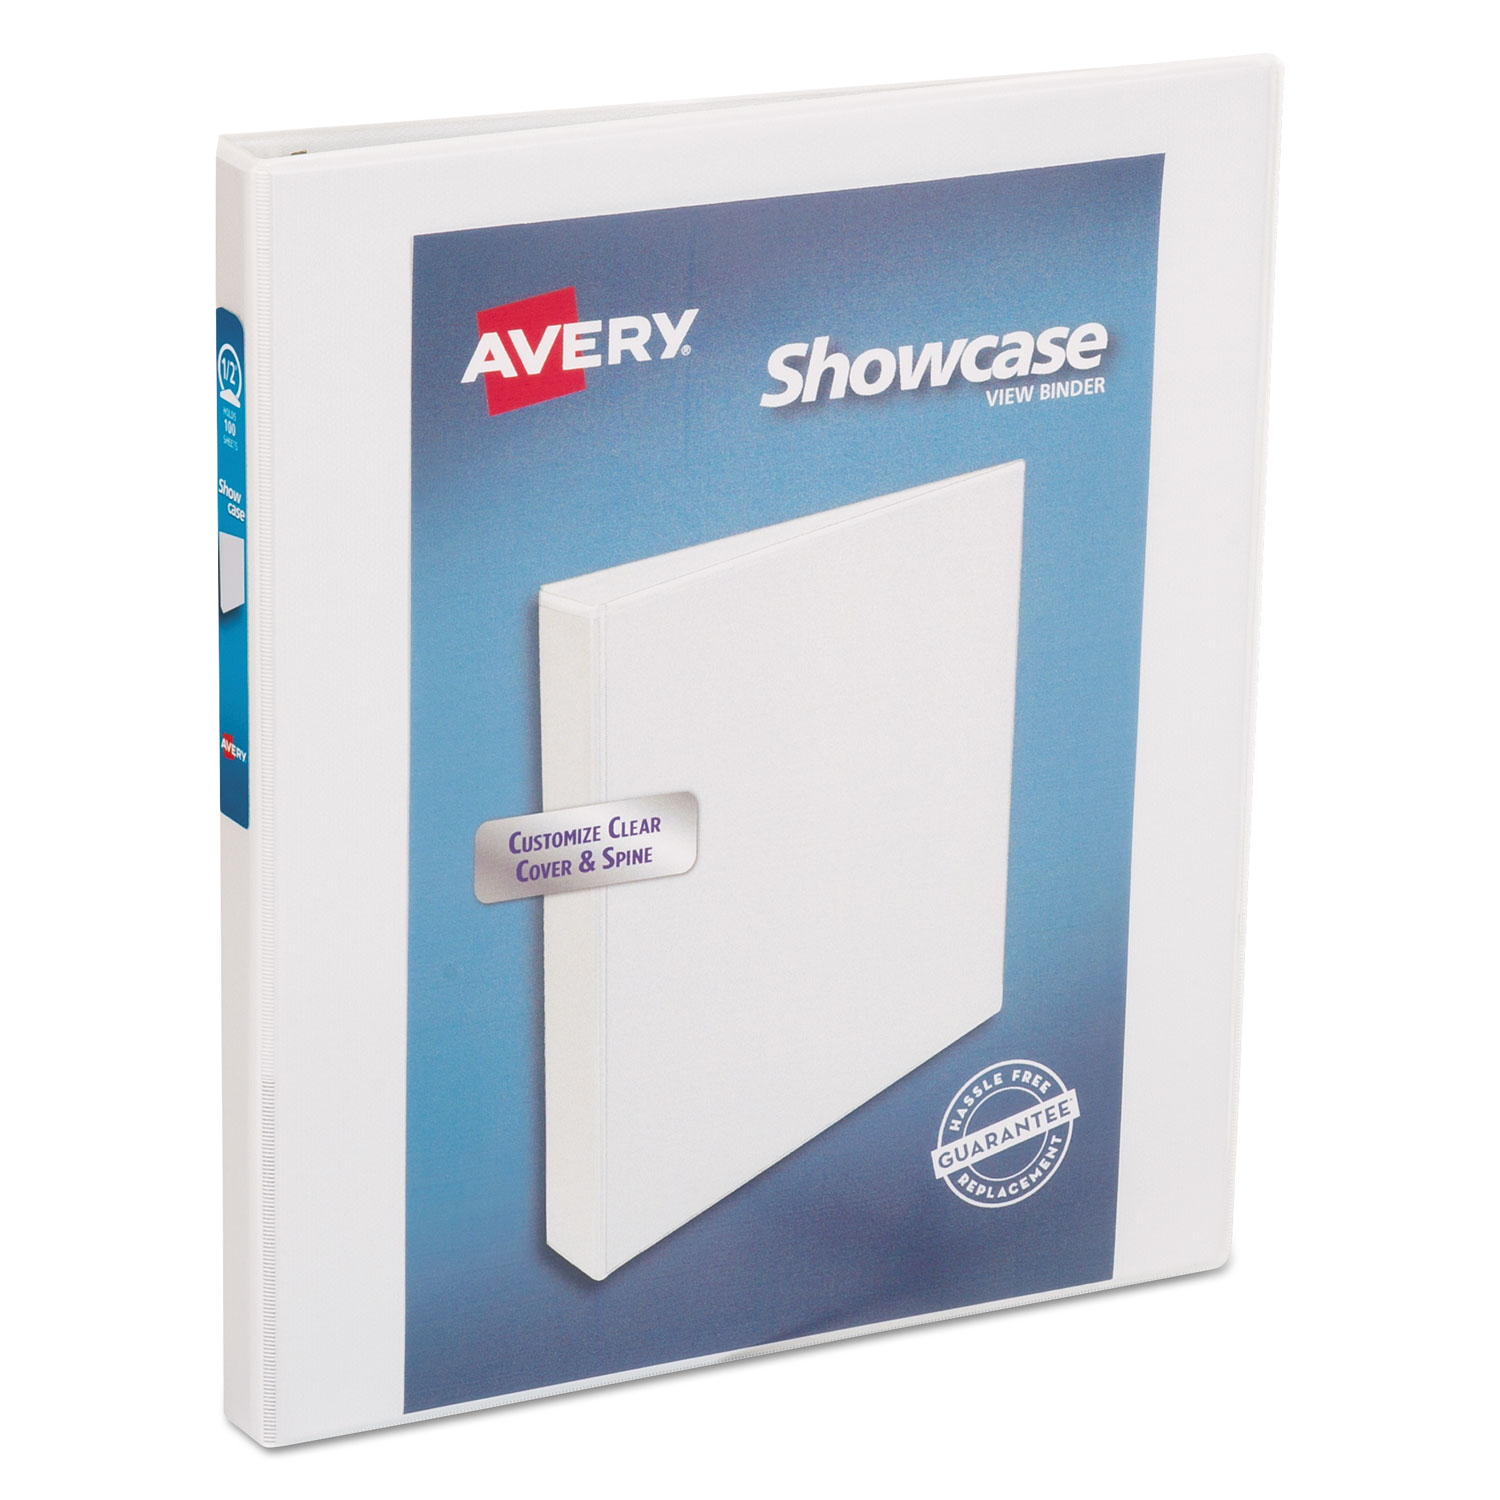  Avery 19551 Showcase Economy View Binder with Round Rings, 3 Rings, 0.5 Capacity, 11 x 8.5, White (AVE19551) 